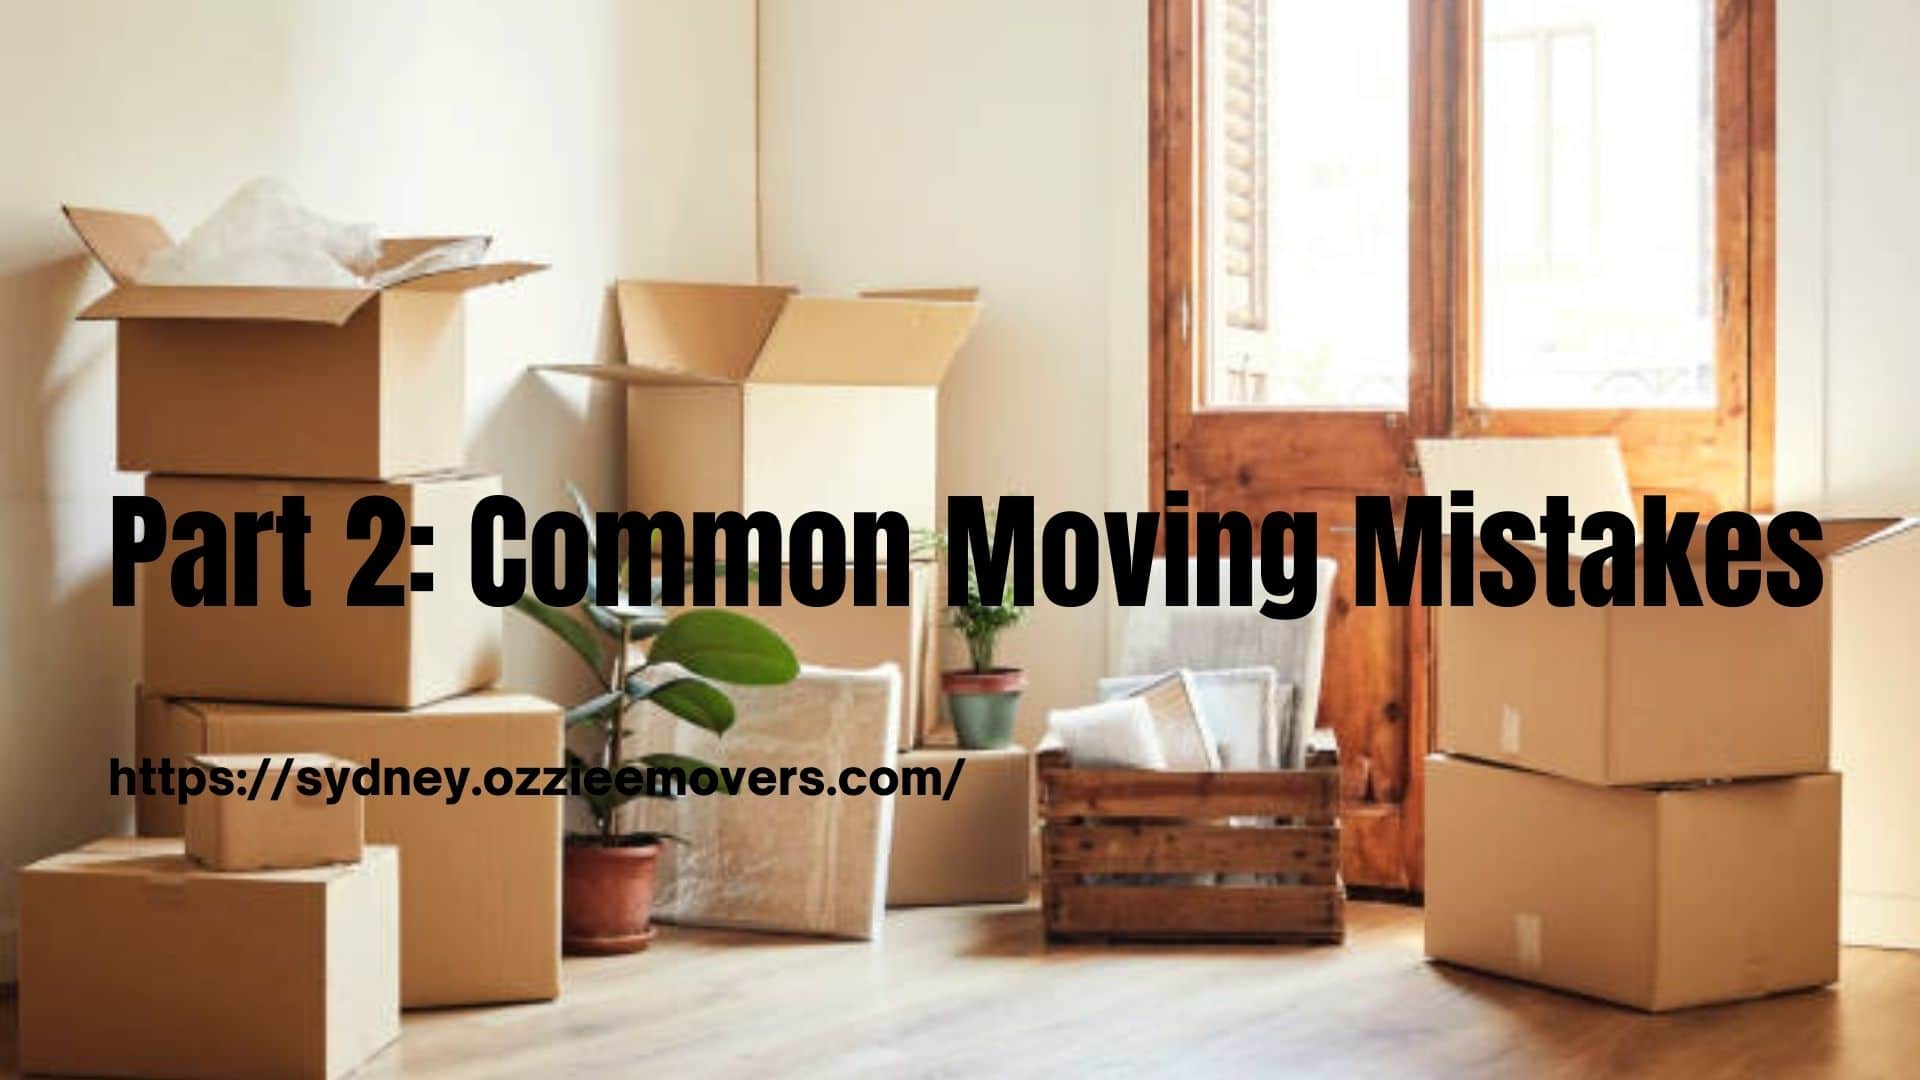 Common Moving Mistake-7db0c0a2